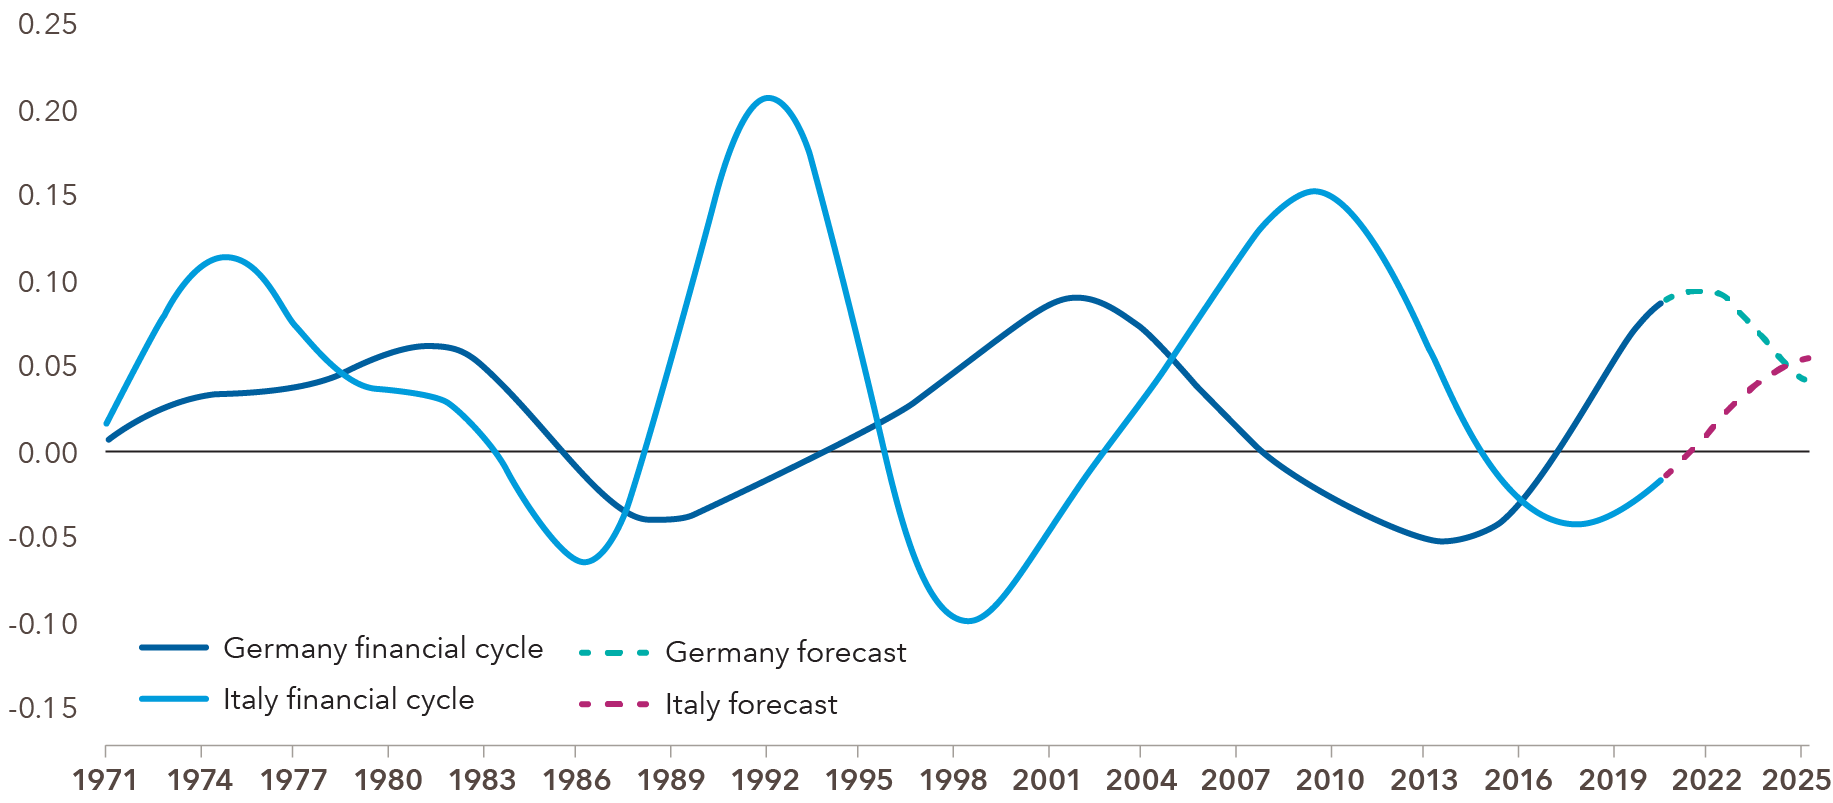 Line chart shows the financial cycles of Germany and Italy from 1971 through the second quarter of 2025. The chart shows that the two tend to diverge. Currently, Germany’s cycle is approaching a peak, while Italy’s cycle is emerging from a trough. Germany’s cycle is forecast to peak in mid-2021. As it declines from that peak, it crosses a rising Italian cycle around mid-2024. Forecast based on the most recent global forecast from the National Institute of Economic and Social Research. 